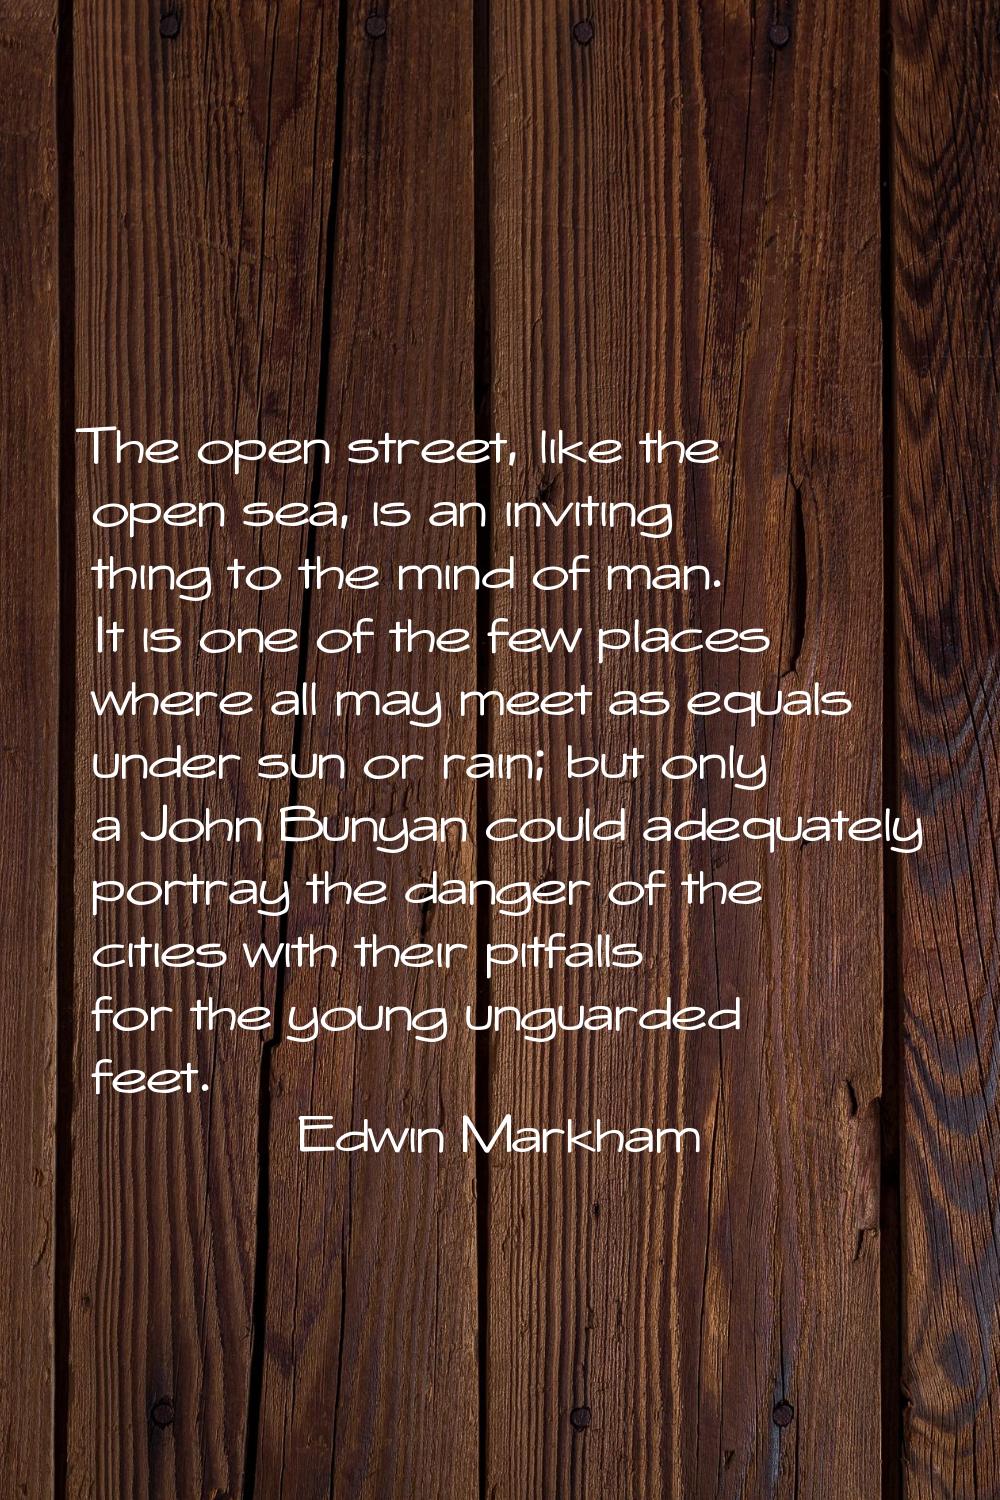 The open street, like the open sea, is an inviting thing to the mind of man. It is one of the few p